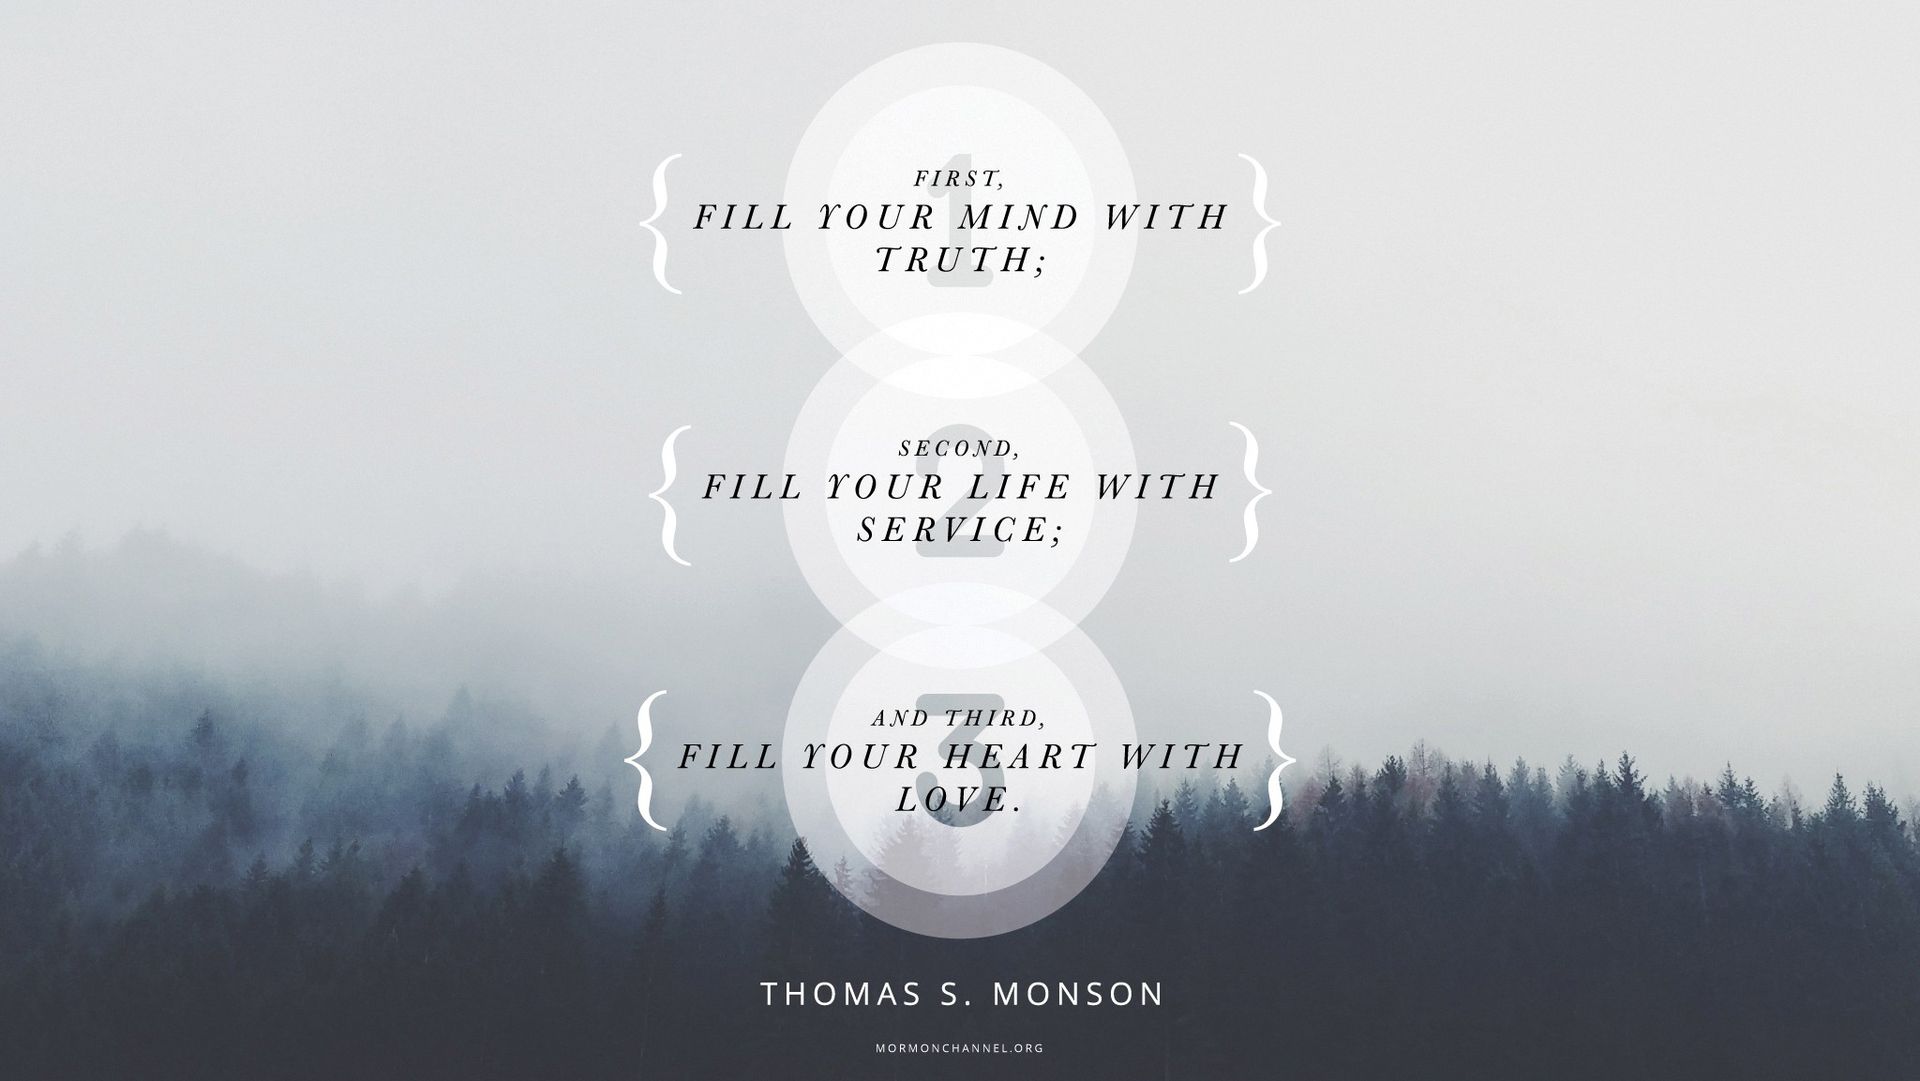 “First, fill your mind with truth; second, fill your life with service; and third, fill your heart with love.”—President Thomas S. Monson, “Formula for Success” © undefined ipCode 1.